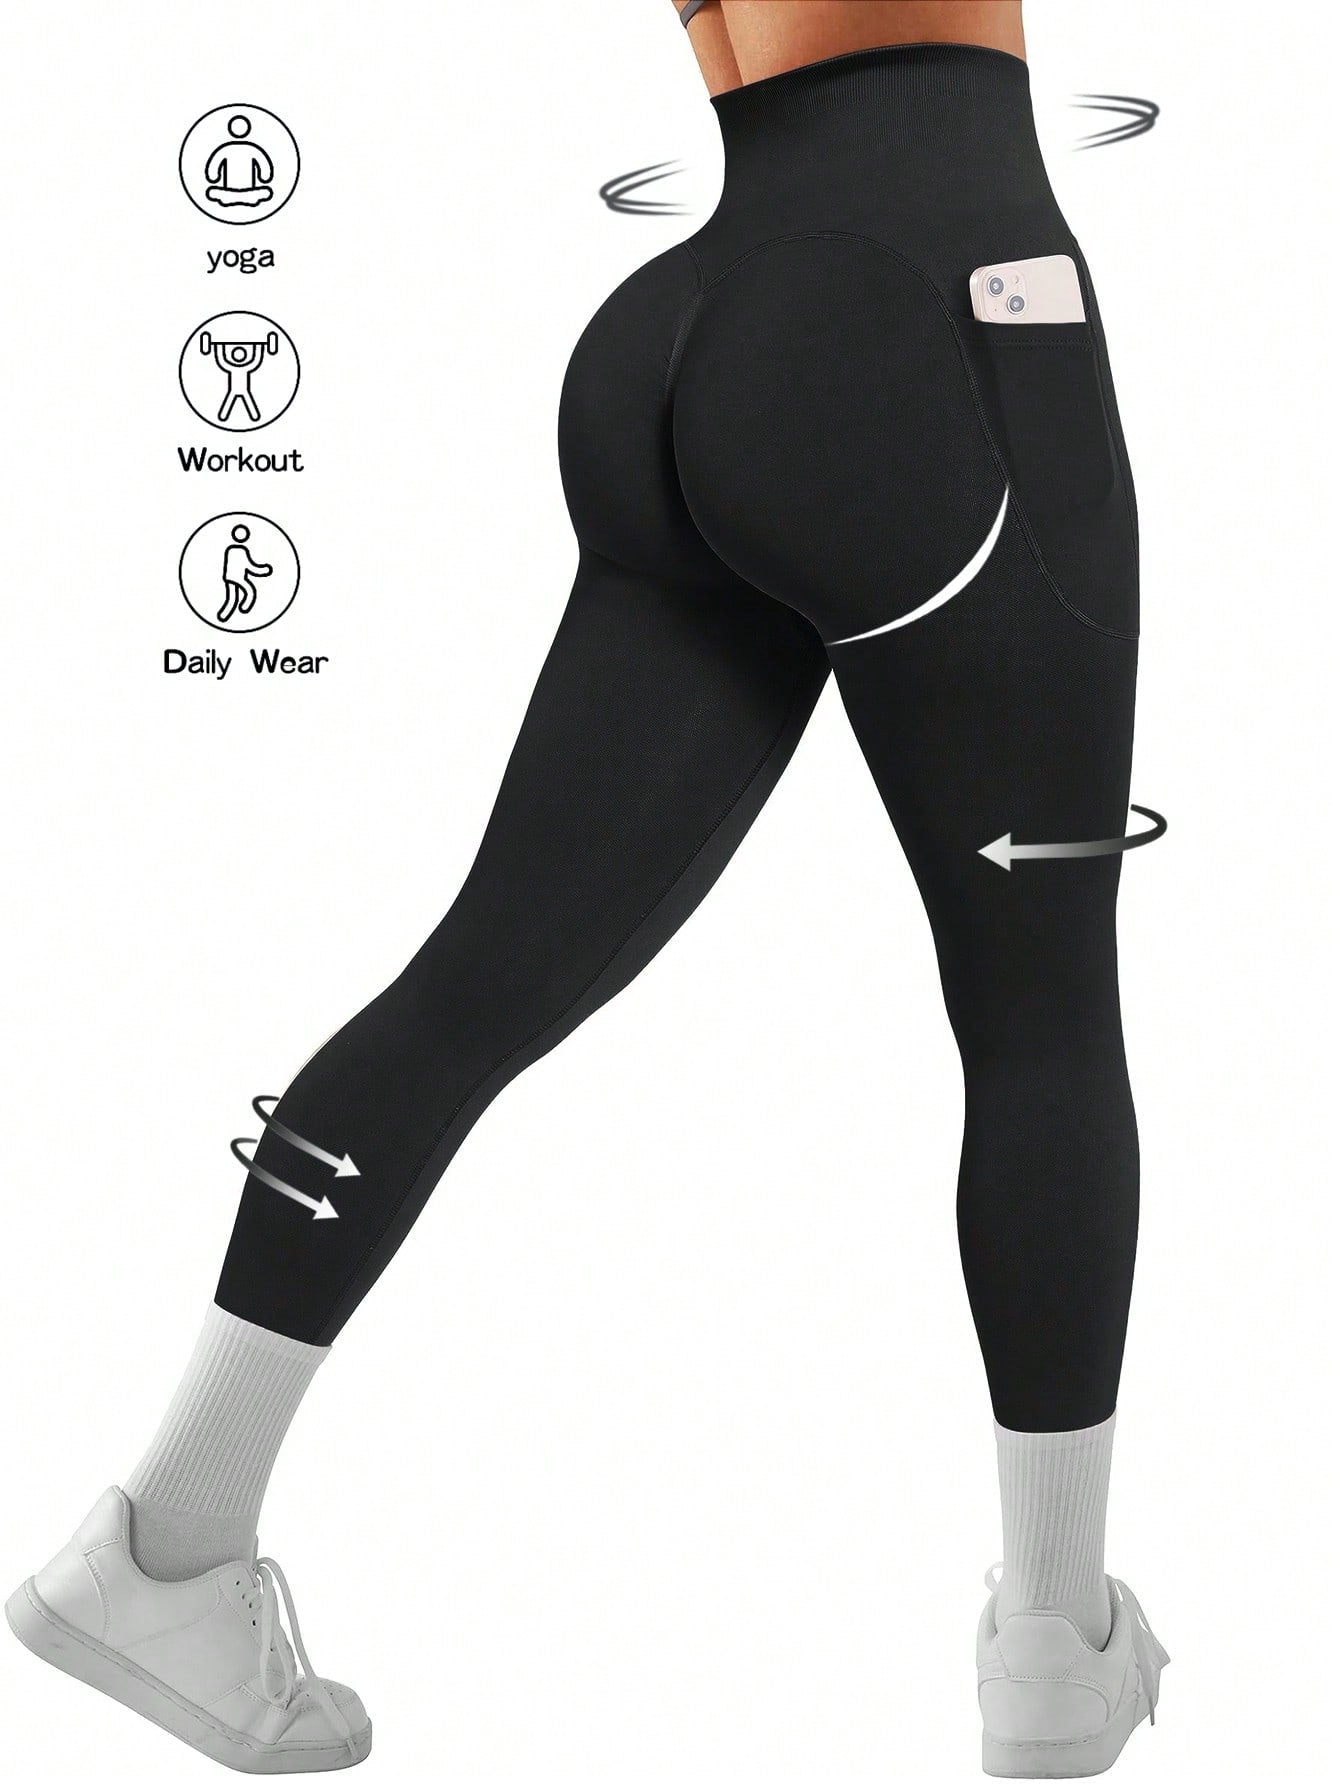 Running Women'S High Elastic Seamless Sports Leggings With Pockets For Workout